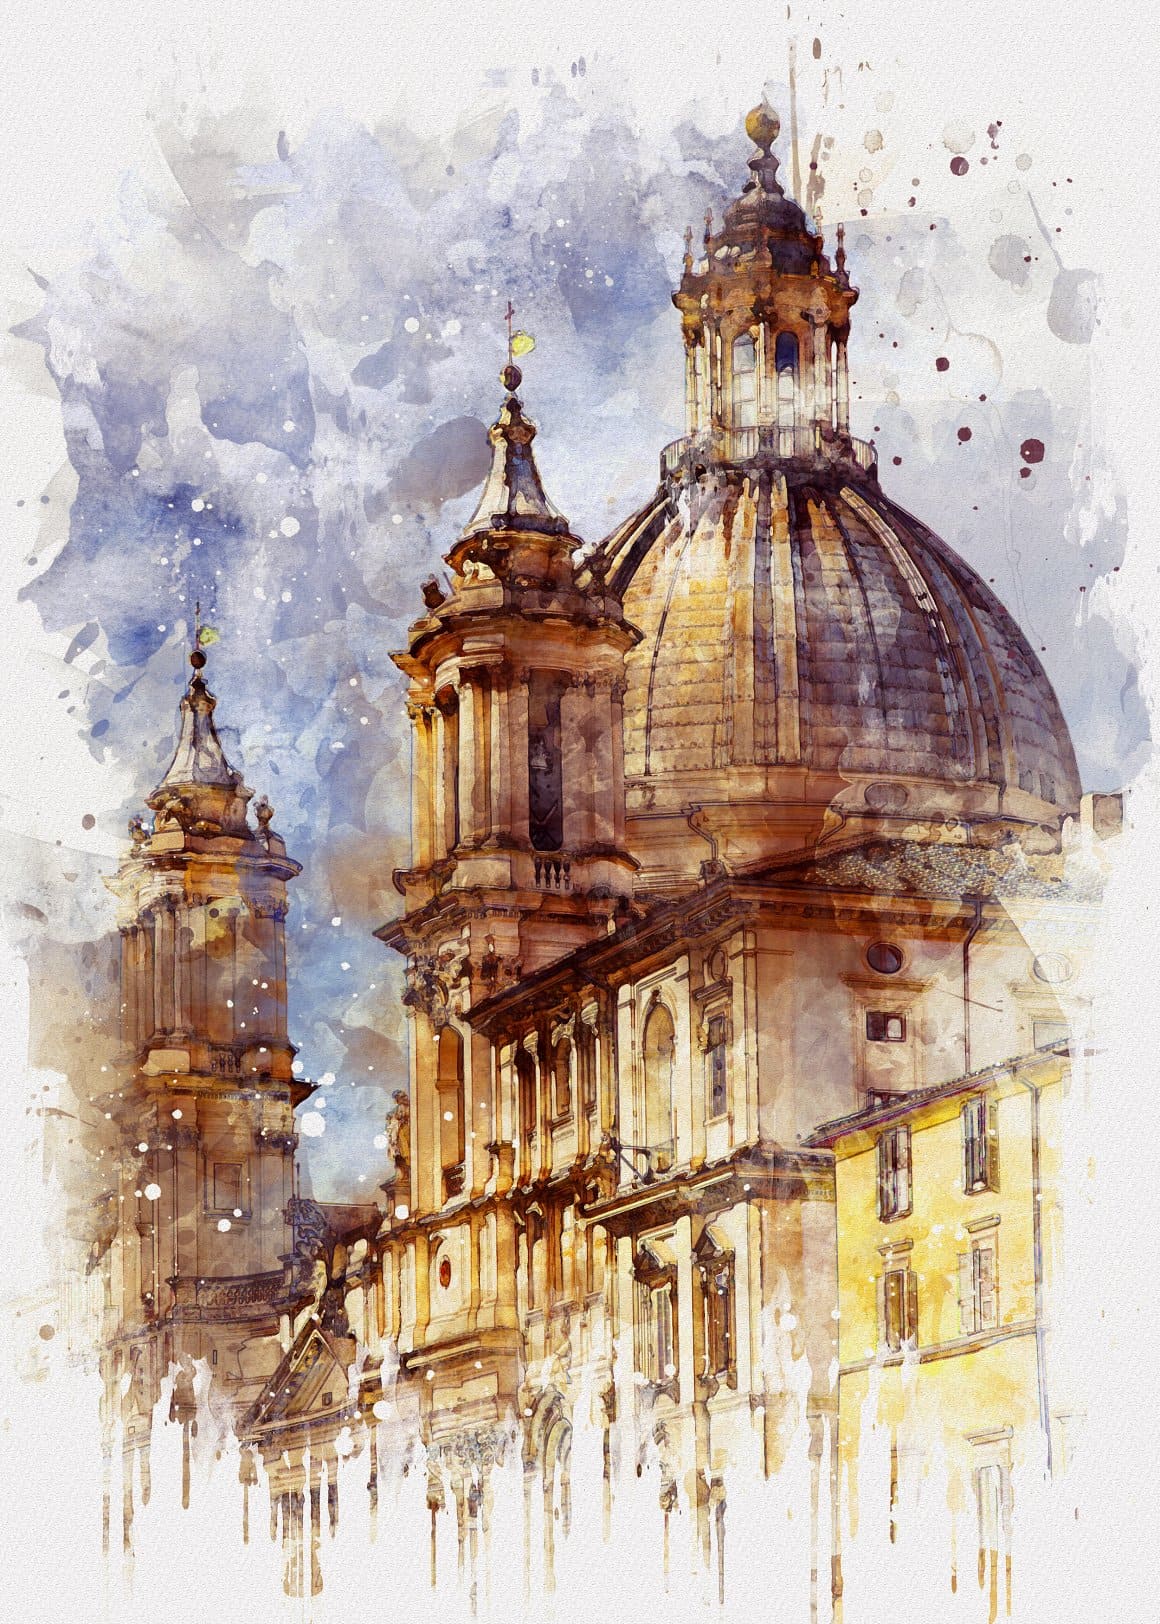 The image of an architectural building is painted in watercolor.